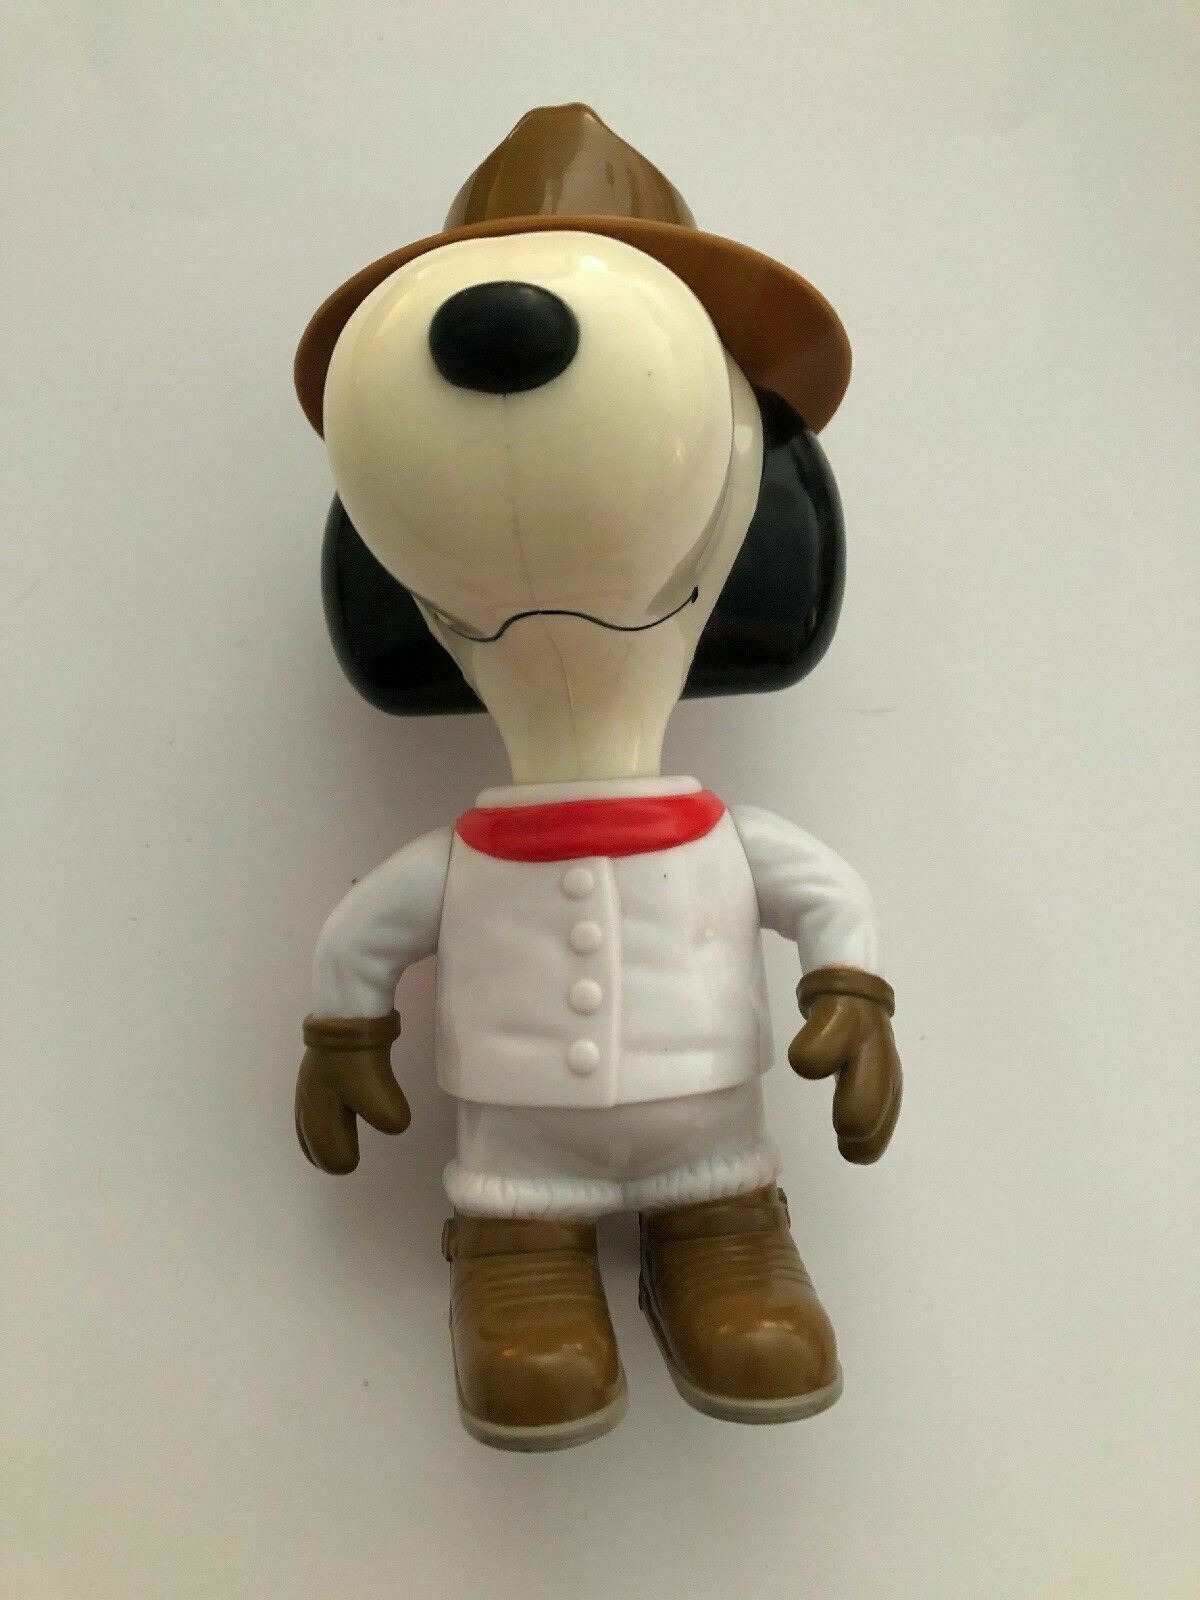 Boy Scout SNOOPY   Genuine McDonald's Toys Peanuts Promotional Toy